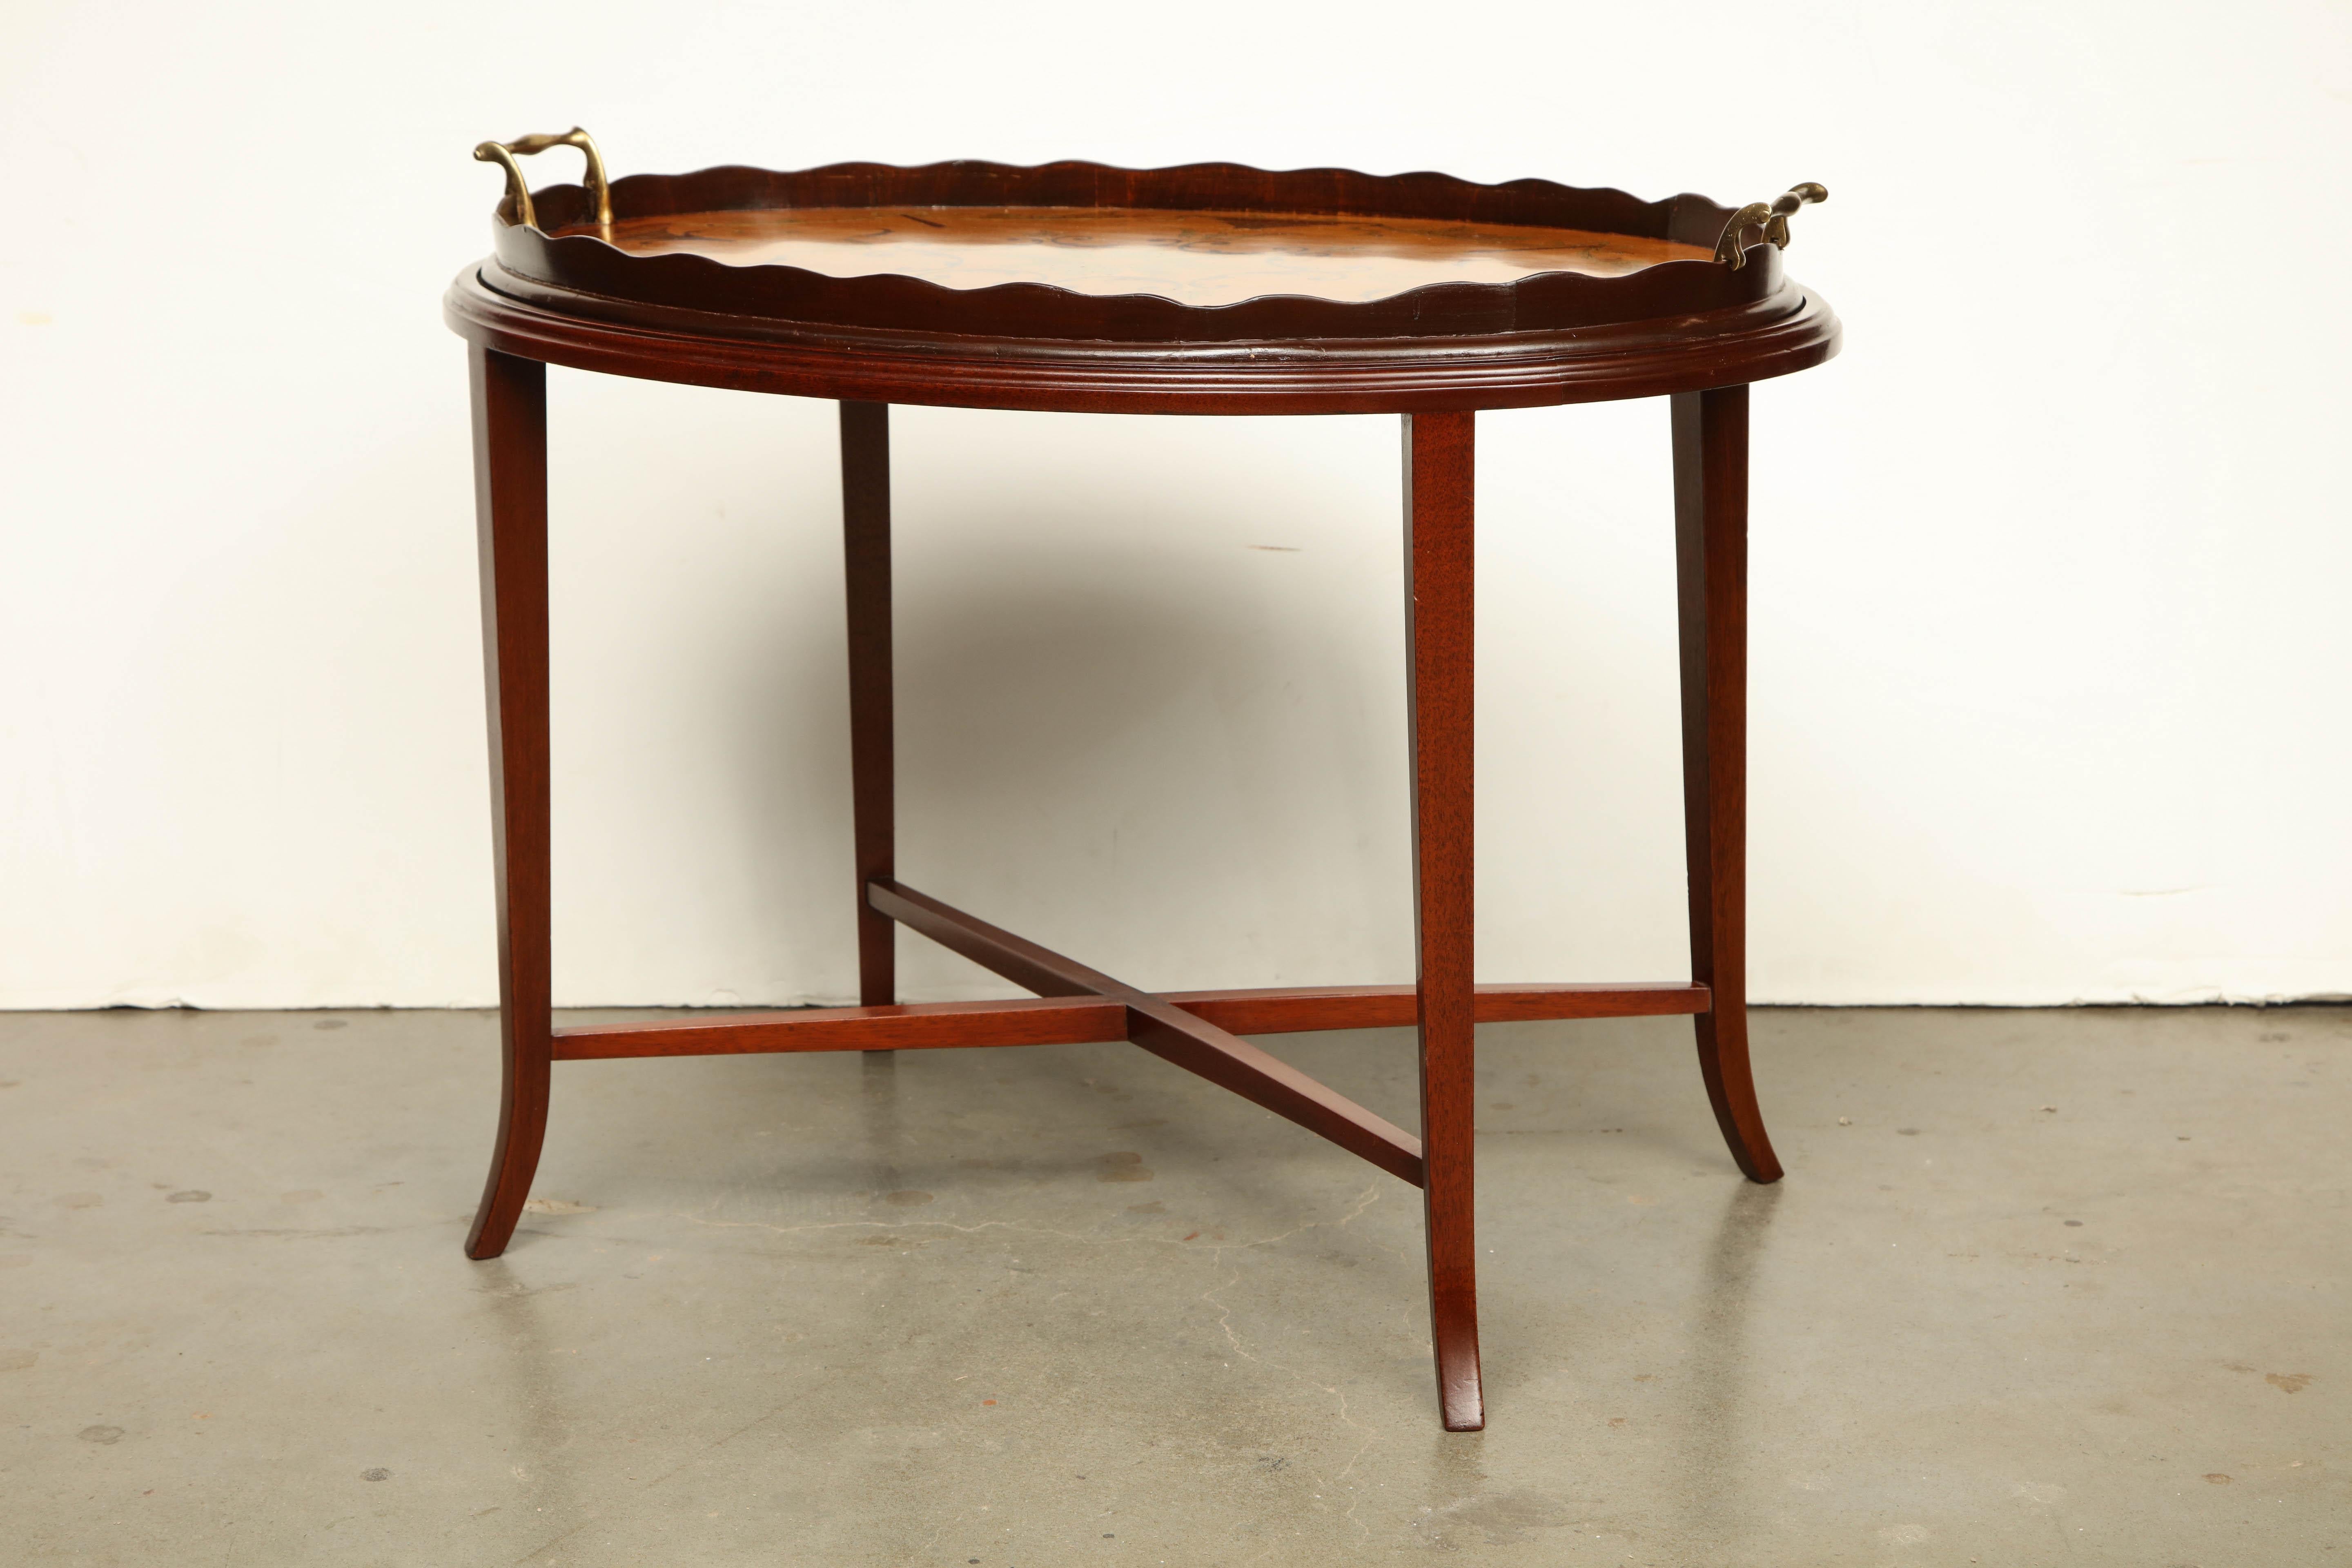 Mid-19th Century English Oval Inlaid Tray on Stand